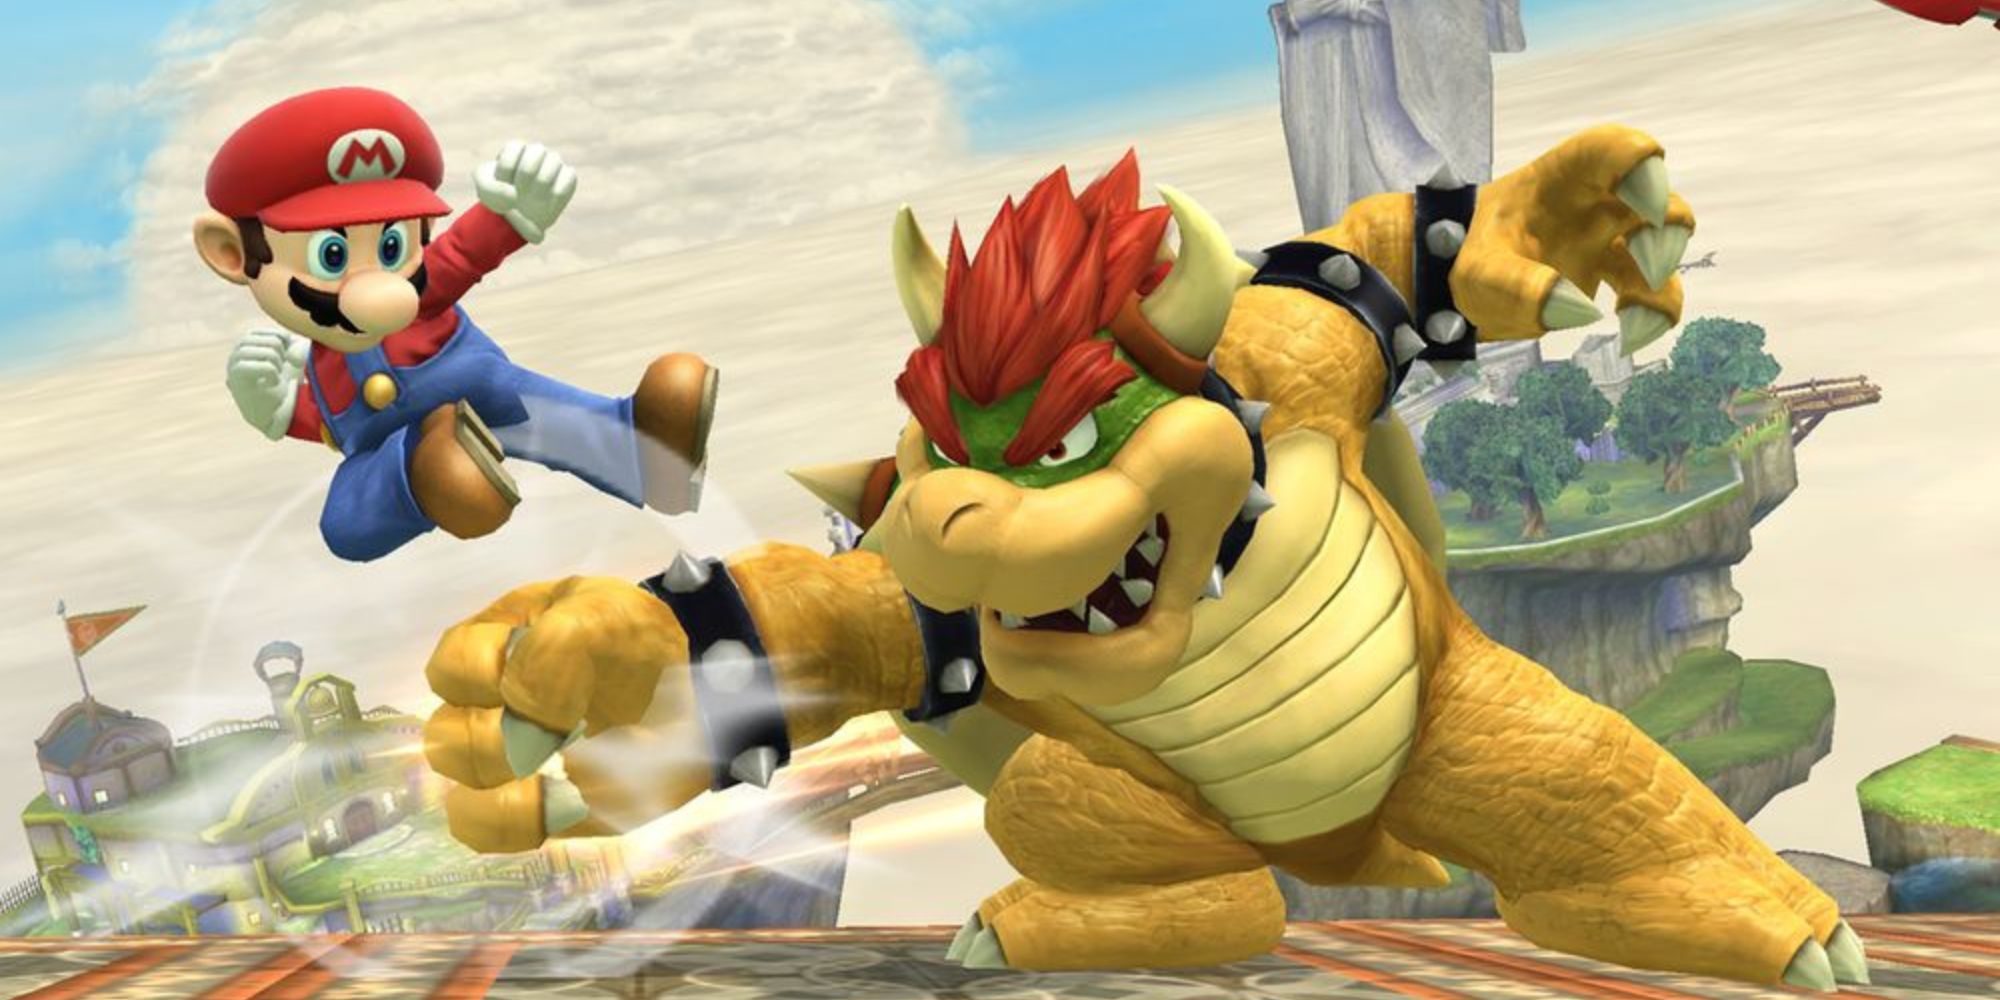 Mario jumps and kicks Bowser while Bowser tries to punch Mario in Super Smash Bros. Ultimate